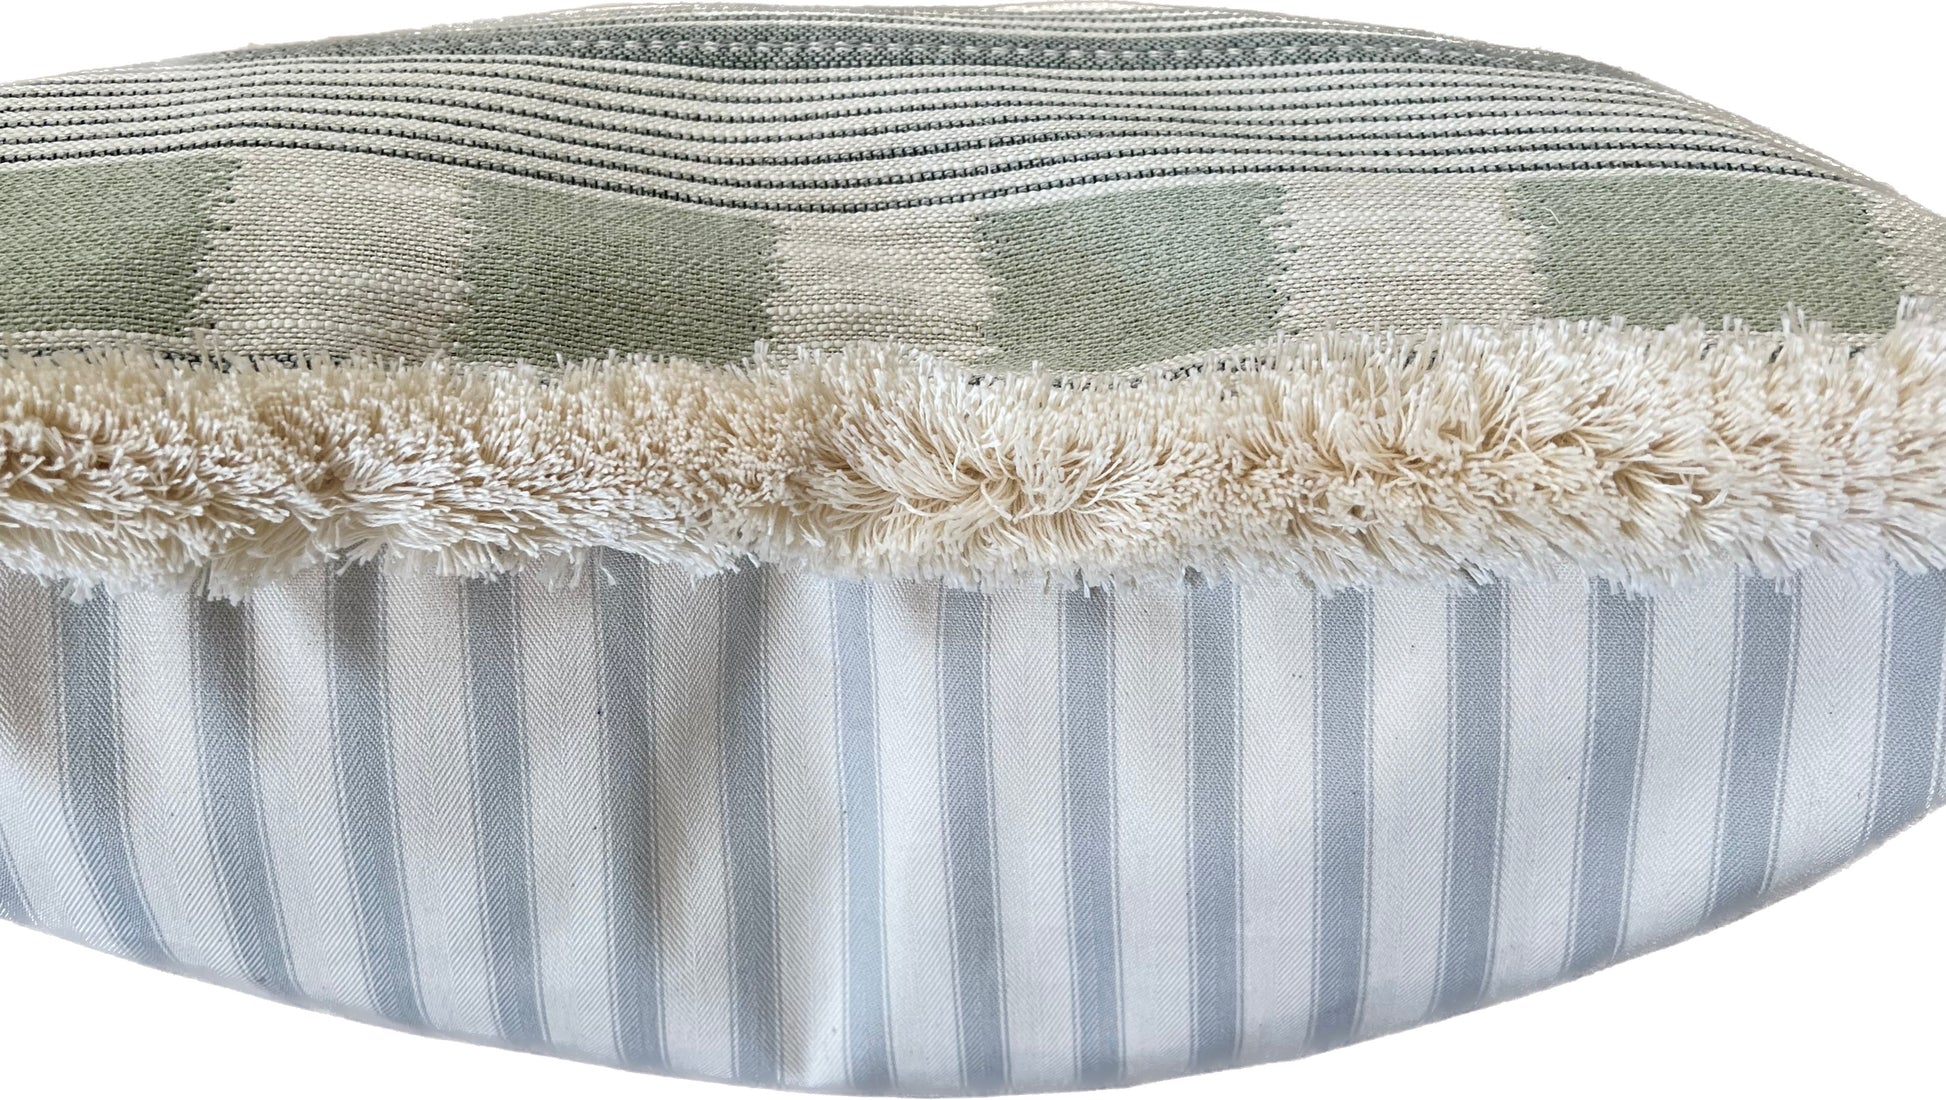 Christopher Farr Cushions - Luxury cushions in Christopher Farr Fabric (Pale Blue Lost and Found)